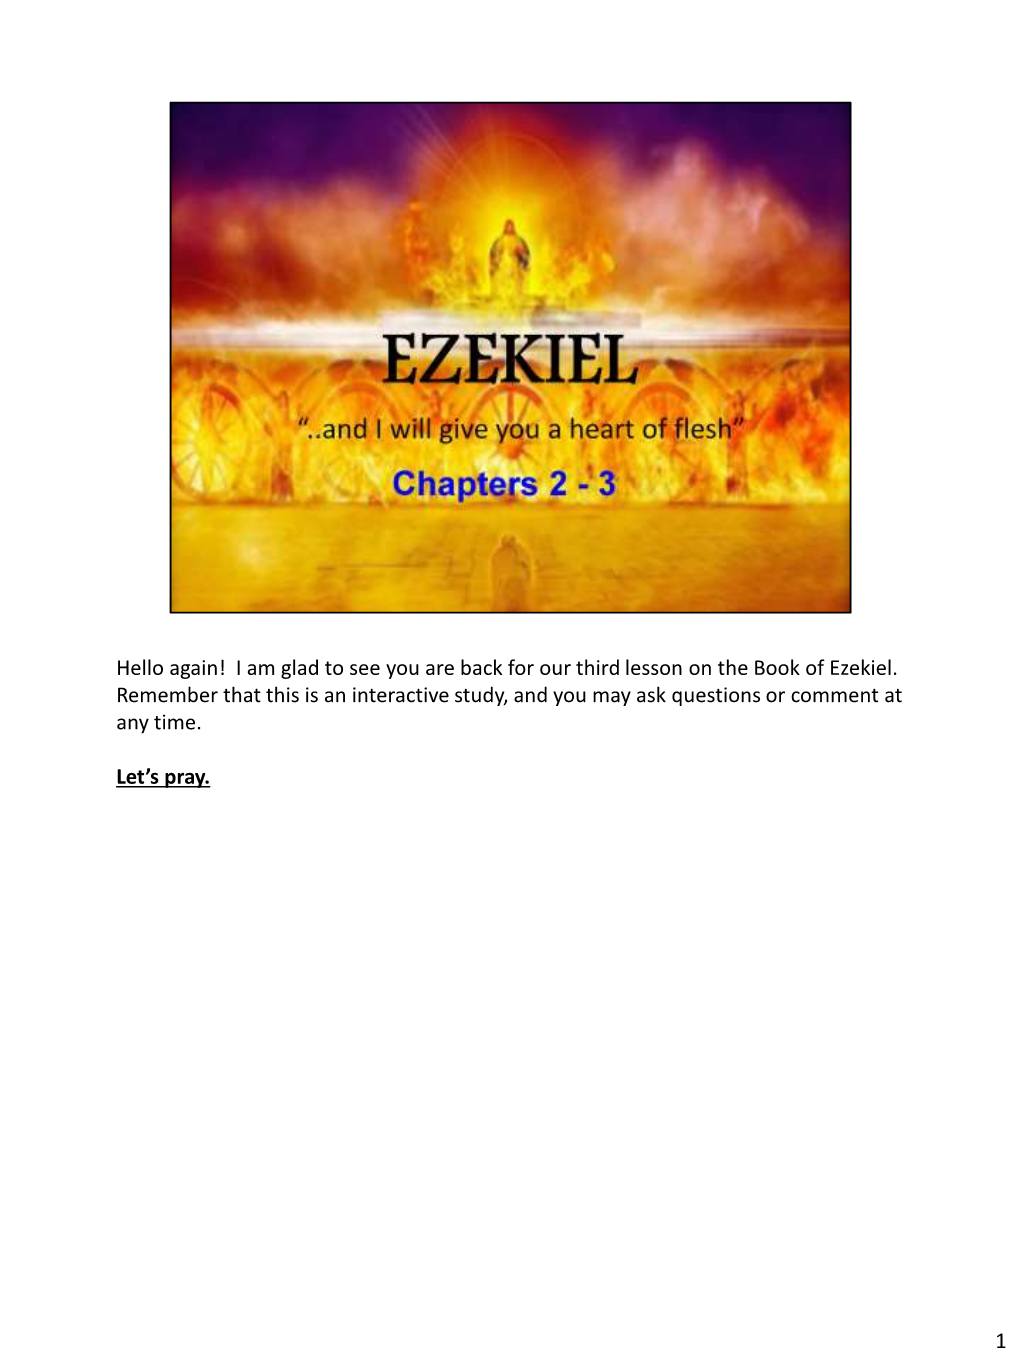 Hello Again! I Am Glad to See You Are Back for Our Third Lesson on the Book of Ezekiel